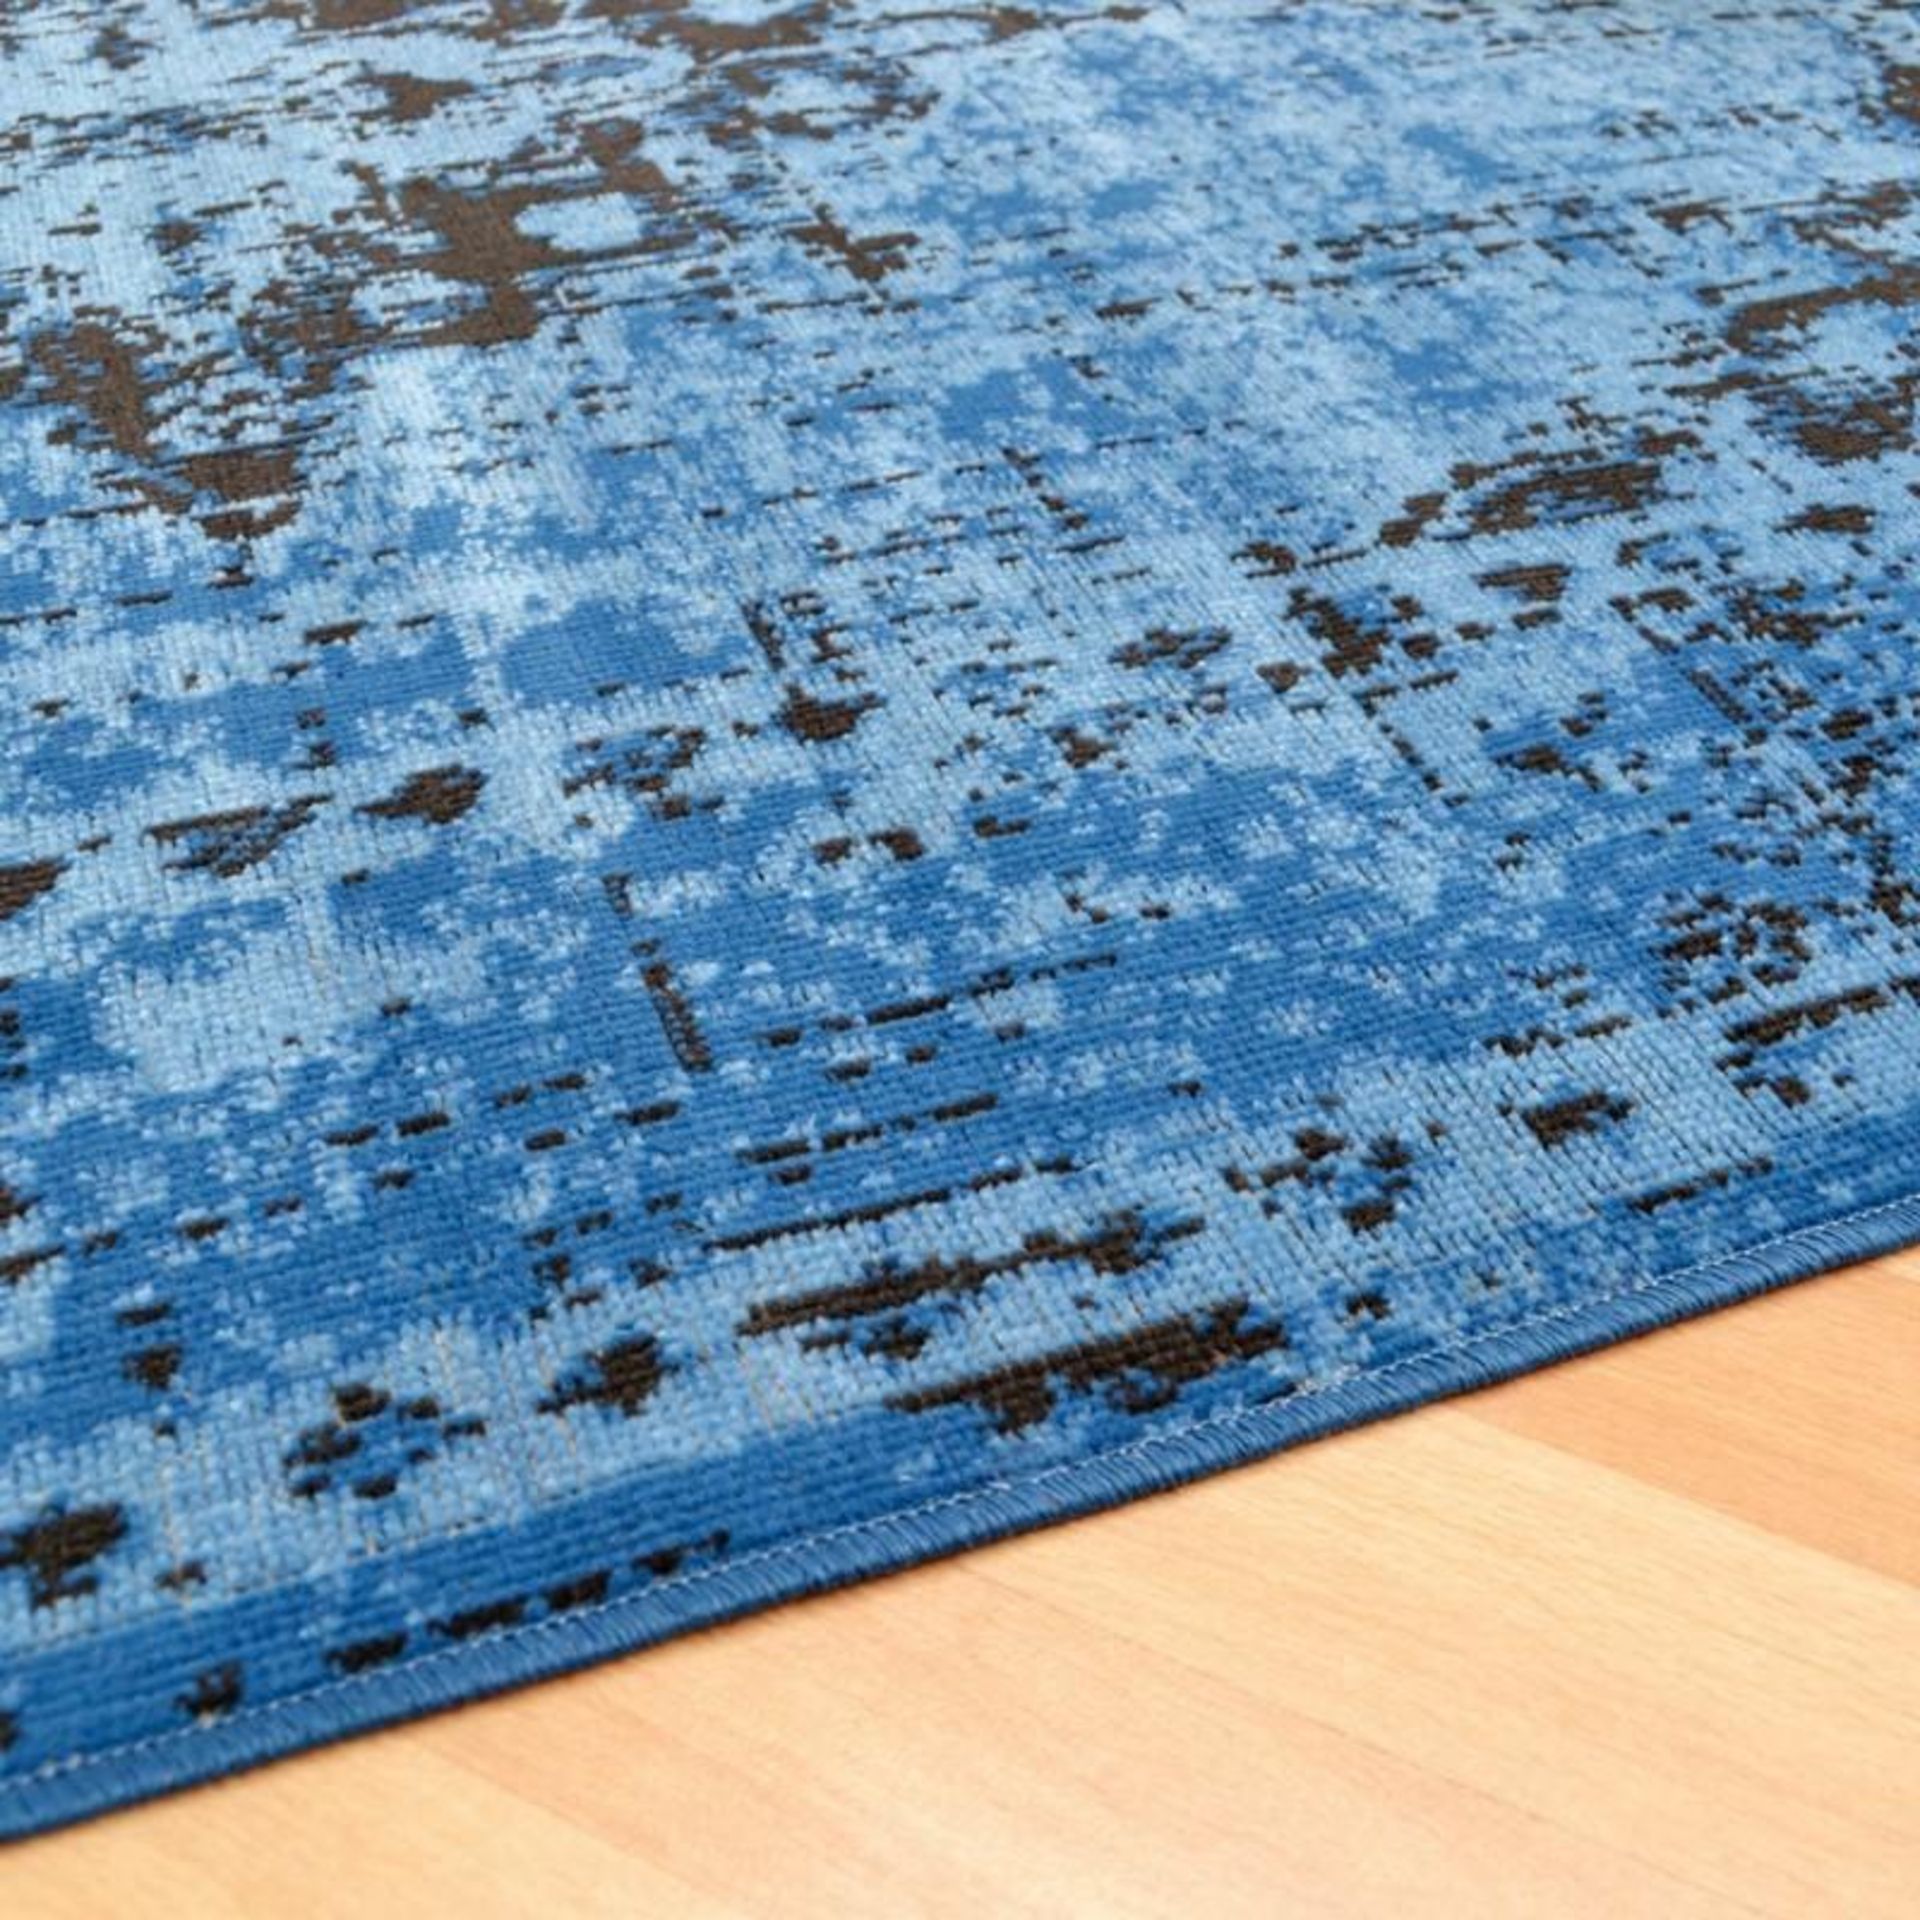 1 x Vintage Style Persian Inspired 'Revive' Rug In Blue - Ref: LF311 - Dimensions: 120 x 170cm - New - Image 3 of 5